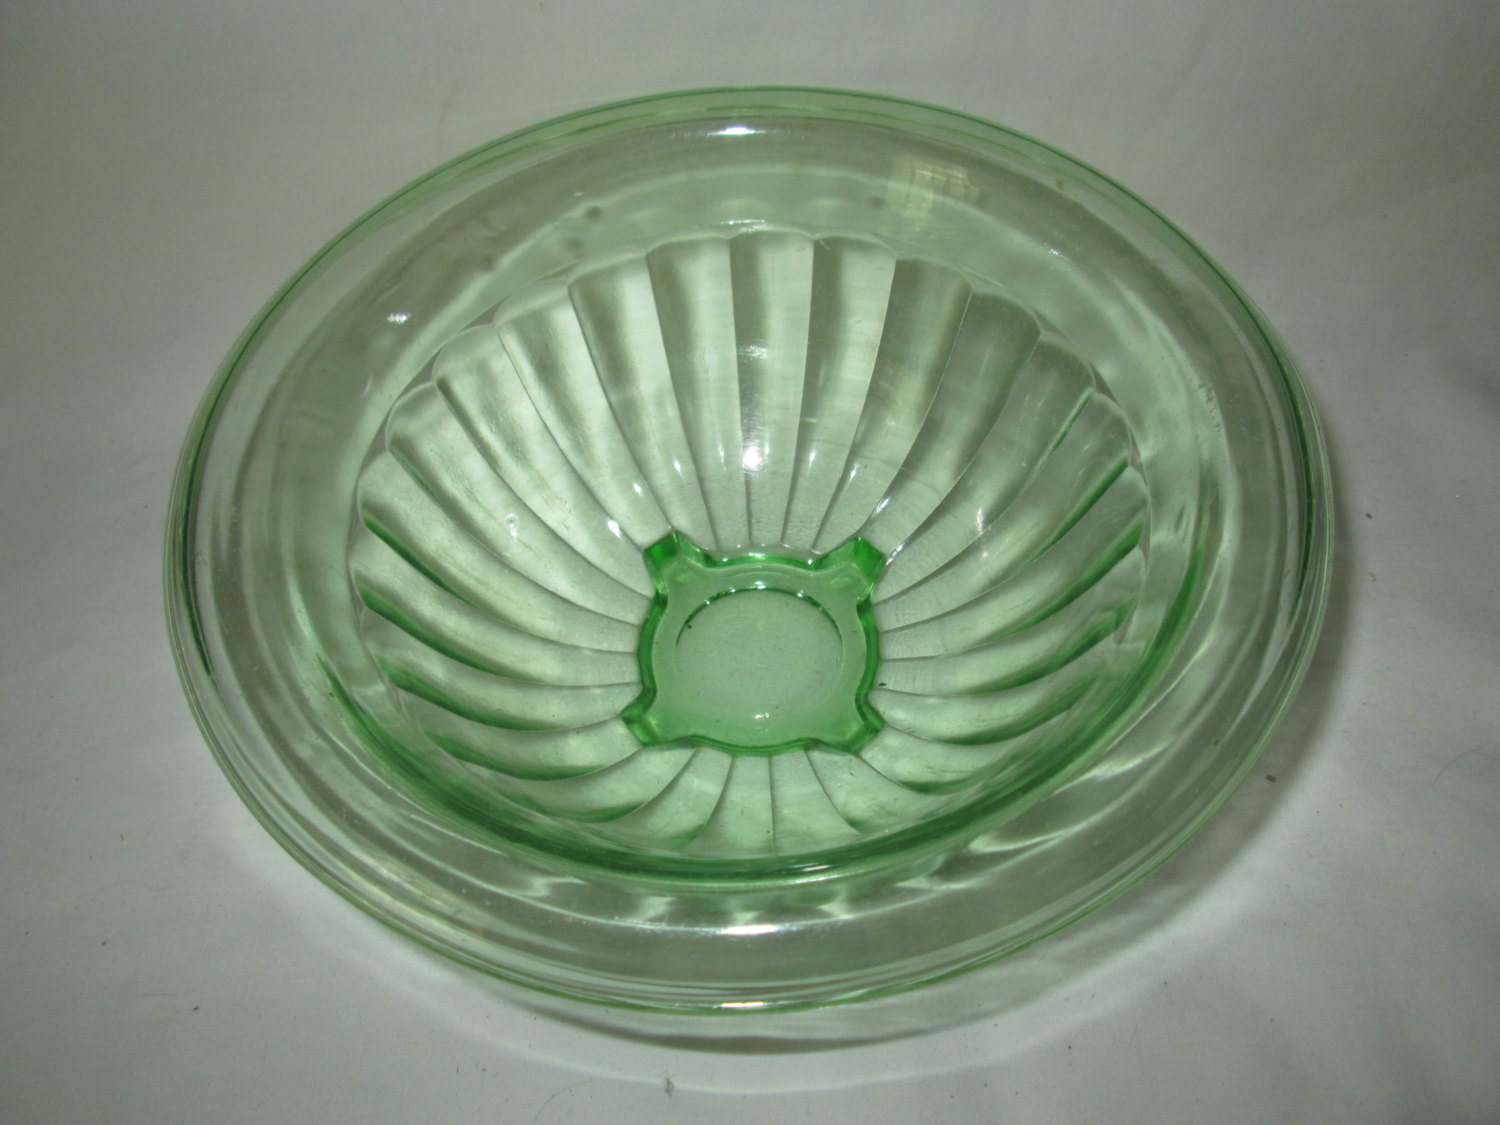 https://www.truevintageantiques.com/wp-content/uploads/2017/06/beautiful-vintage-green-depression-glass-bowl-with-wide-rim-mixing-bowl-594ad8b01.jpg